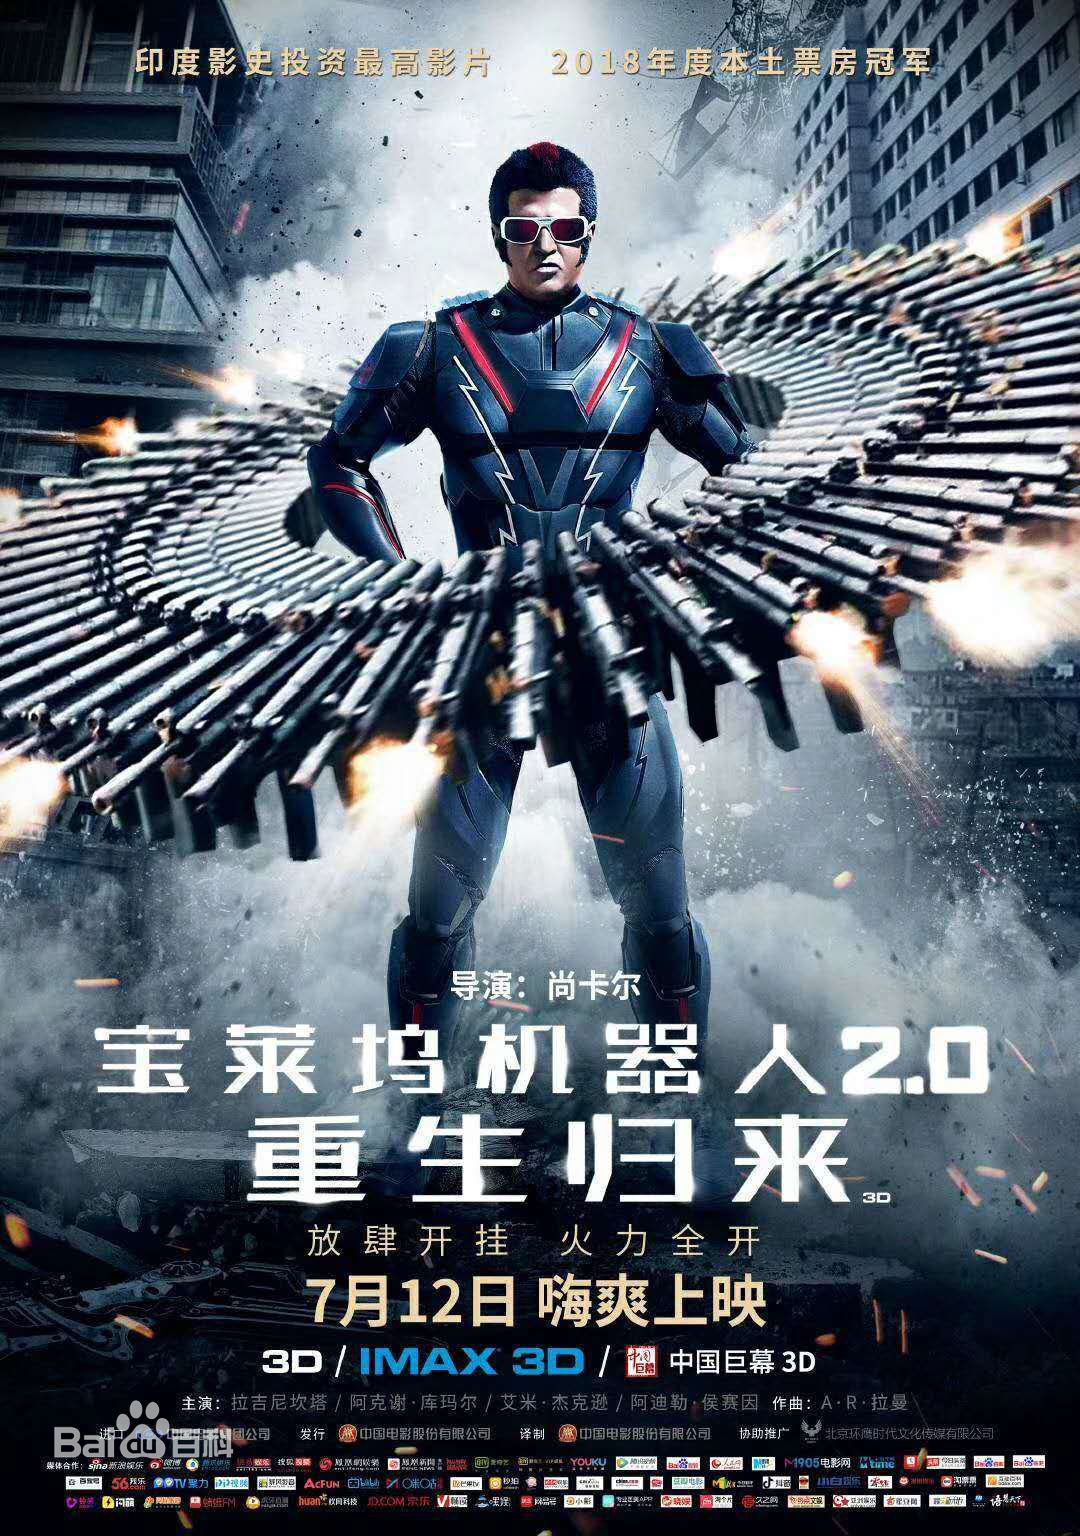 Estación de ferrocarril beneficioso Inhibir Global Times en Twitter: "Indian movie #2Point0 starring AkshayKumar and  Rajinikanth will release in China on July 12. The 2018 #Bollywood  blockbuster, Robot 2.0: Resurgence in Chinese, will “be the biggest IMAX